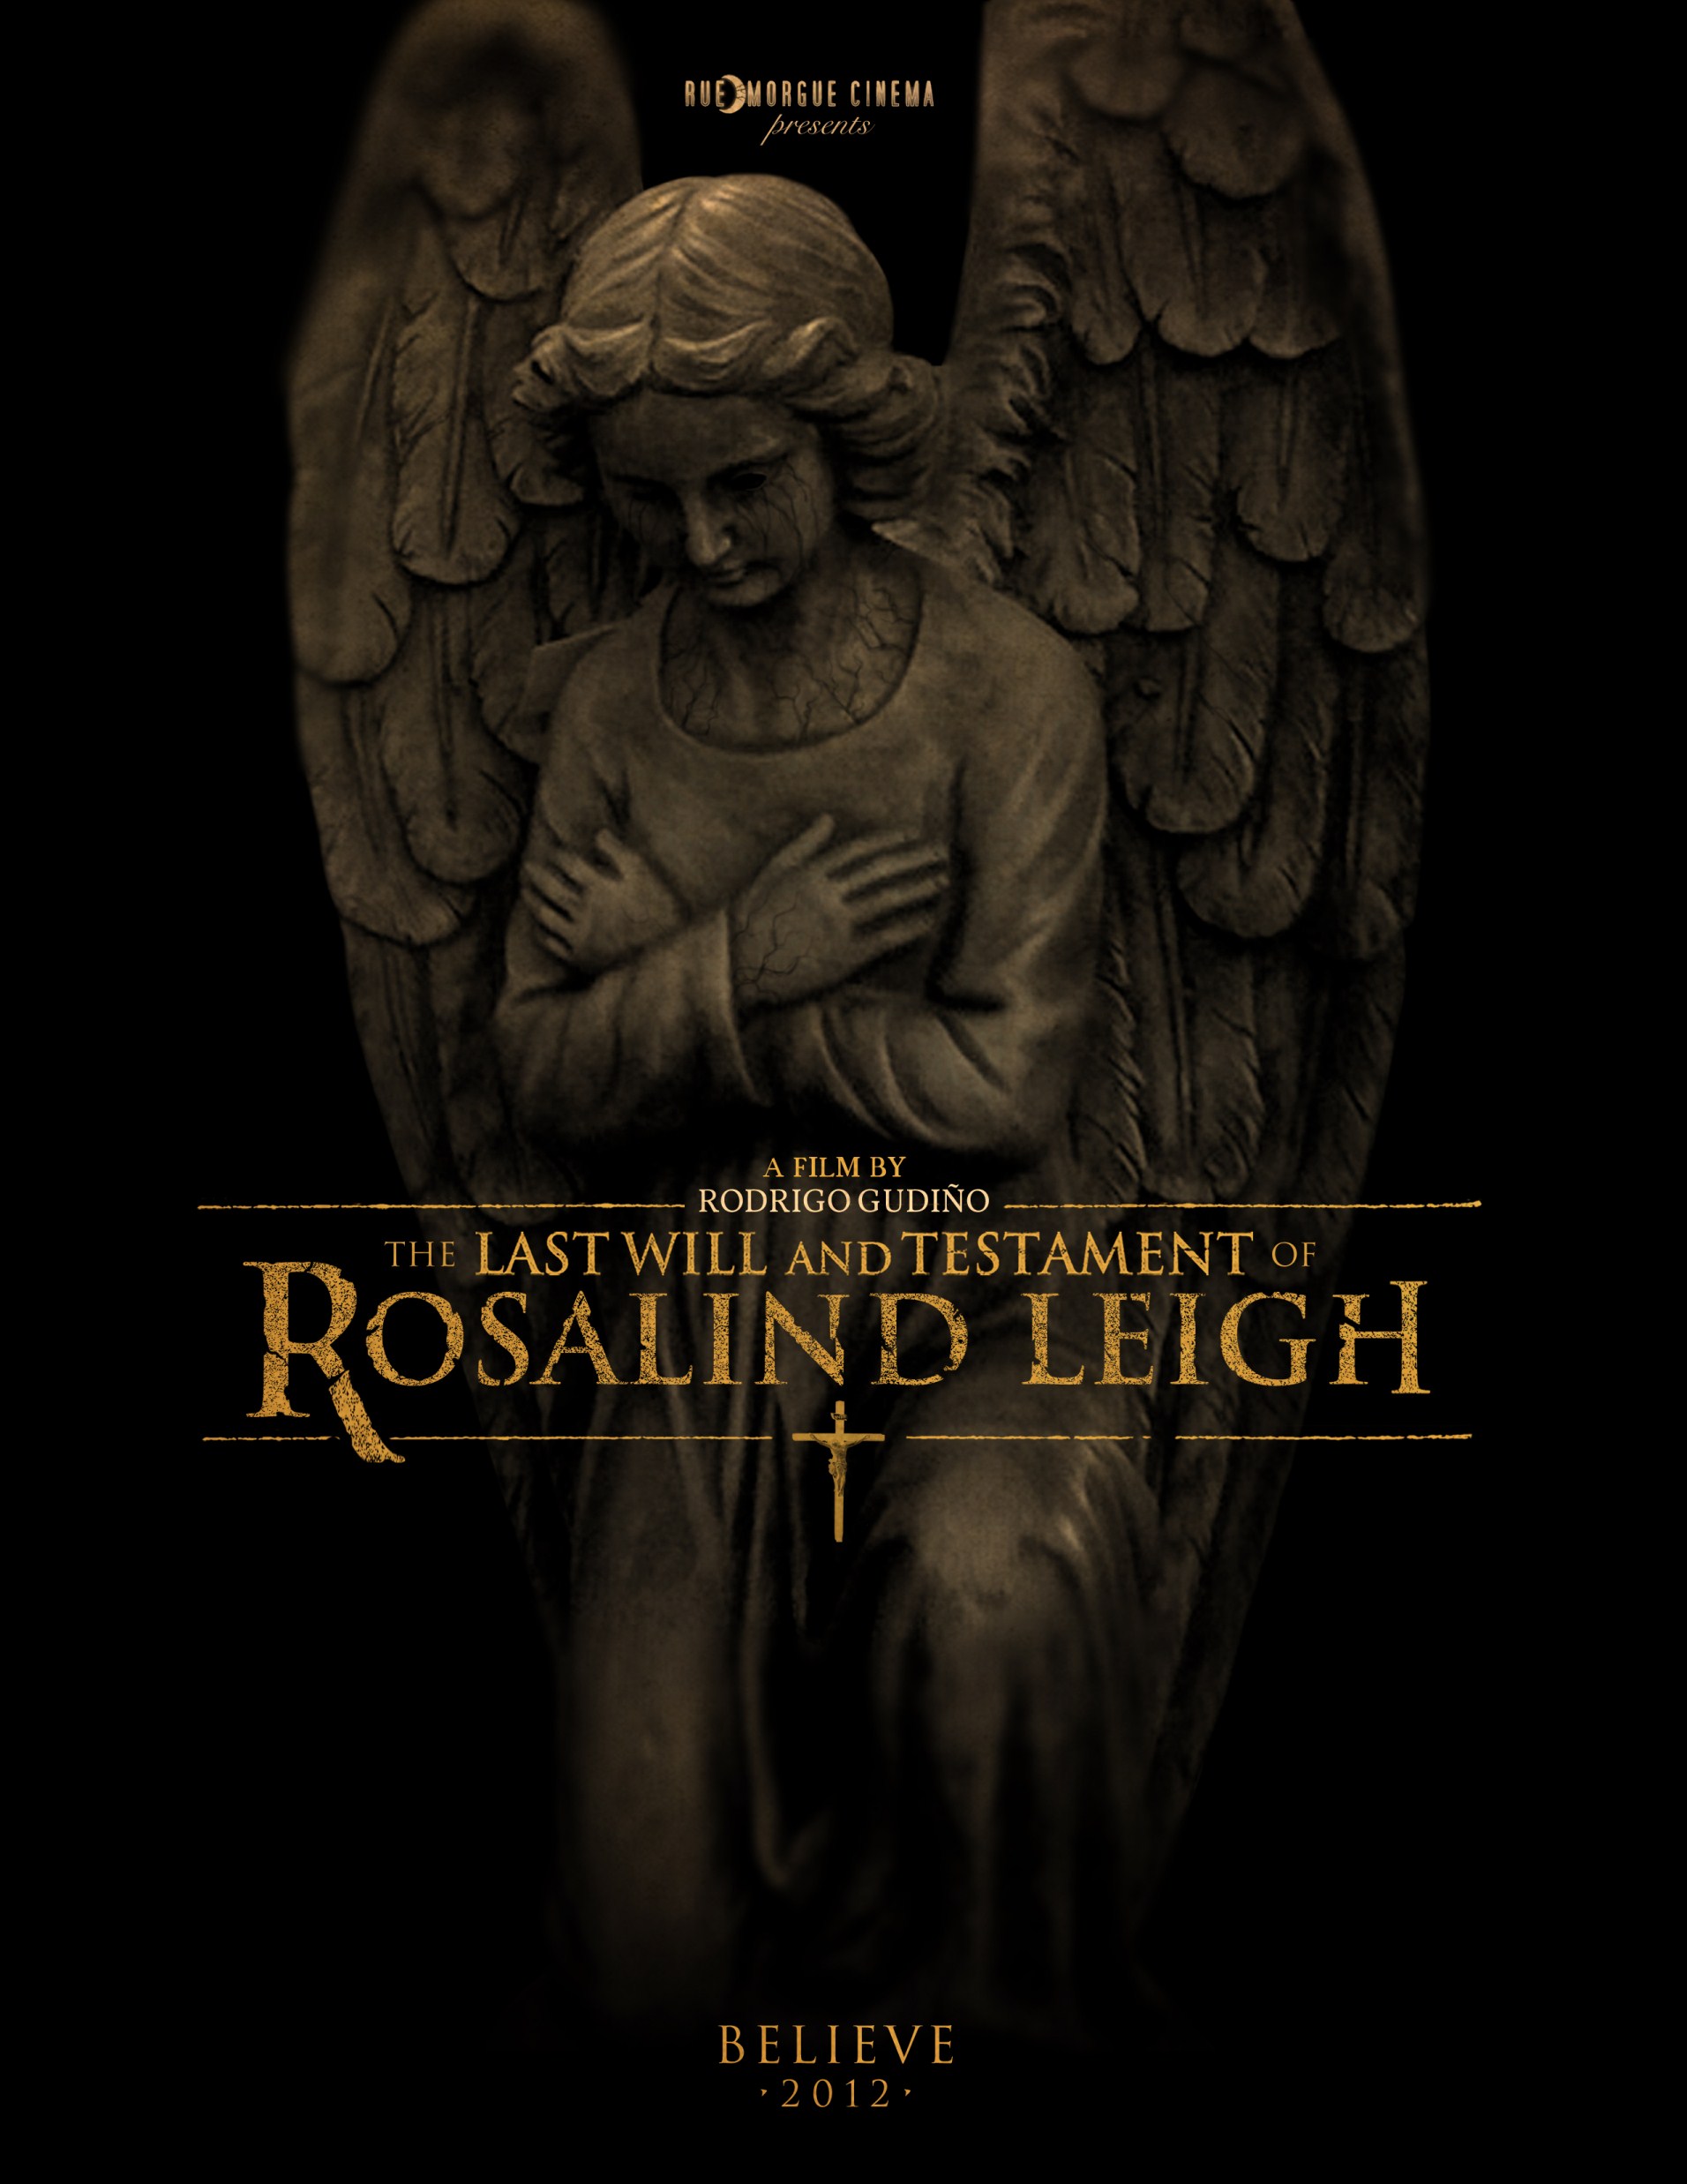 Last Will and Testament of Rosalind Leigh-poster (1912 x 2475).jpg